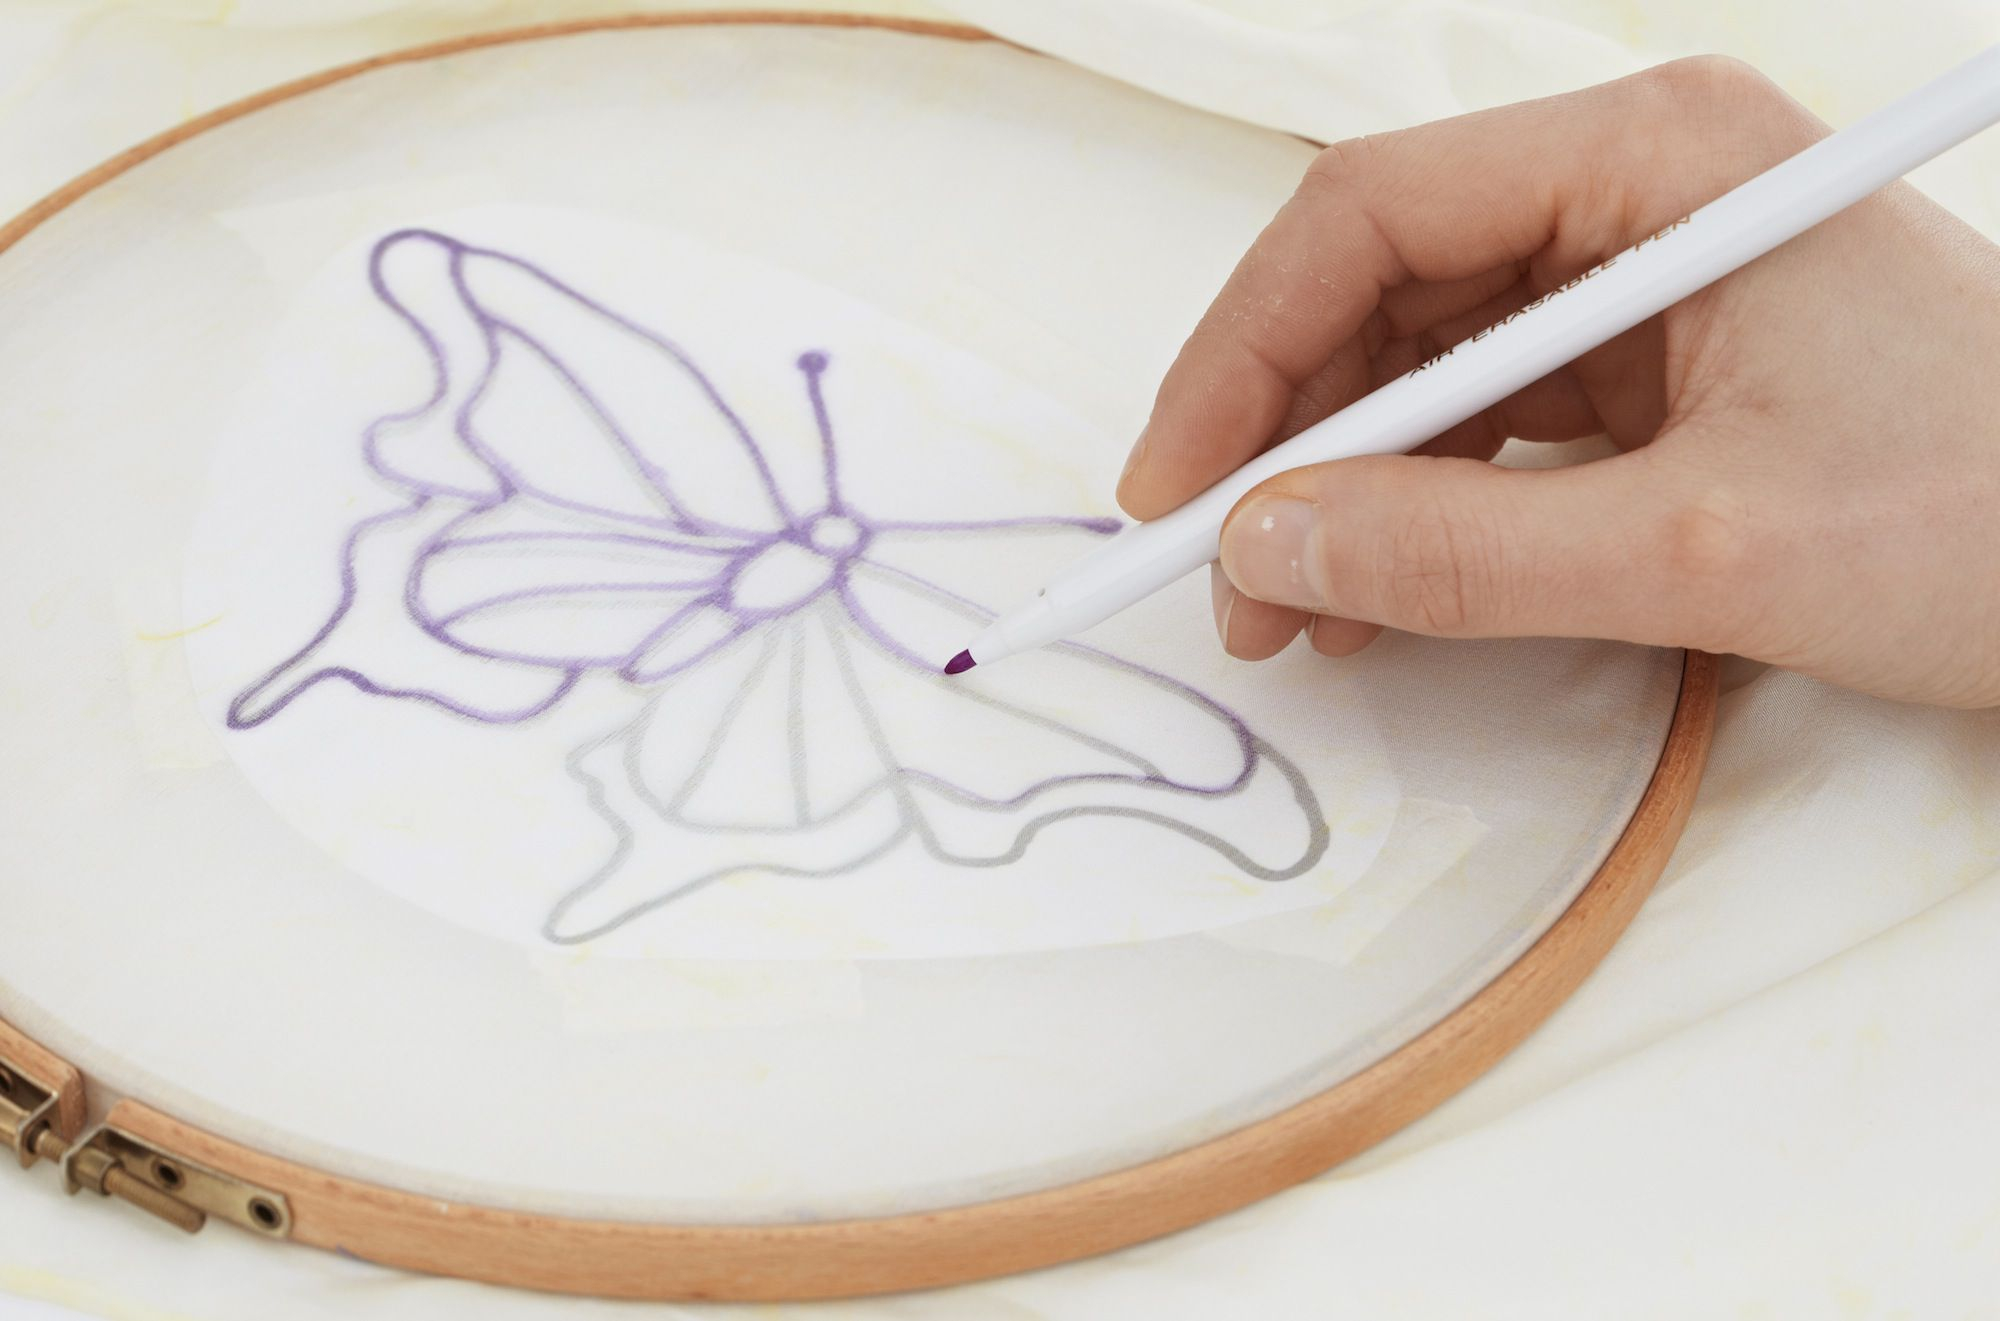 How To Transfer Embroidery Pattern 7 Methods For Marking Or Transferring Embroidery Patterns